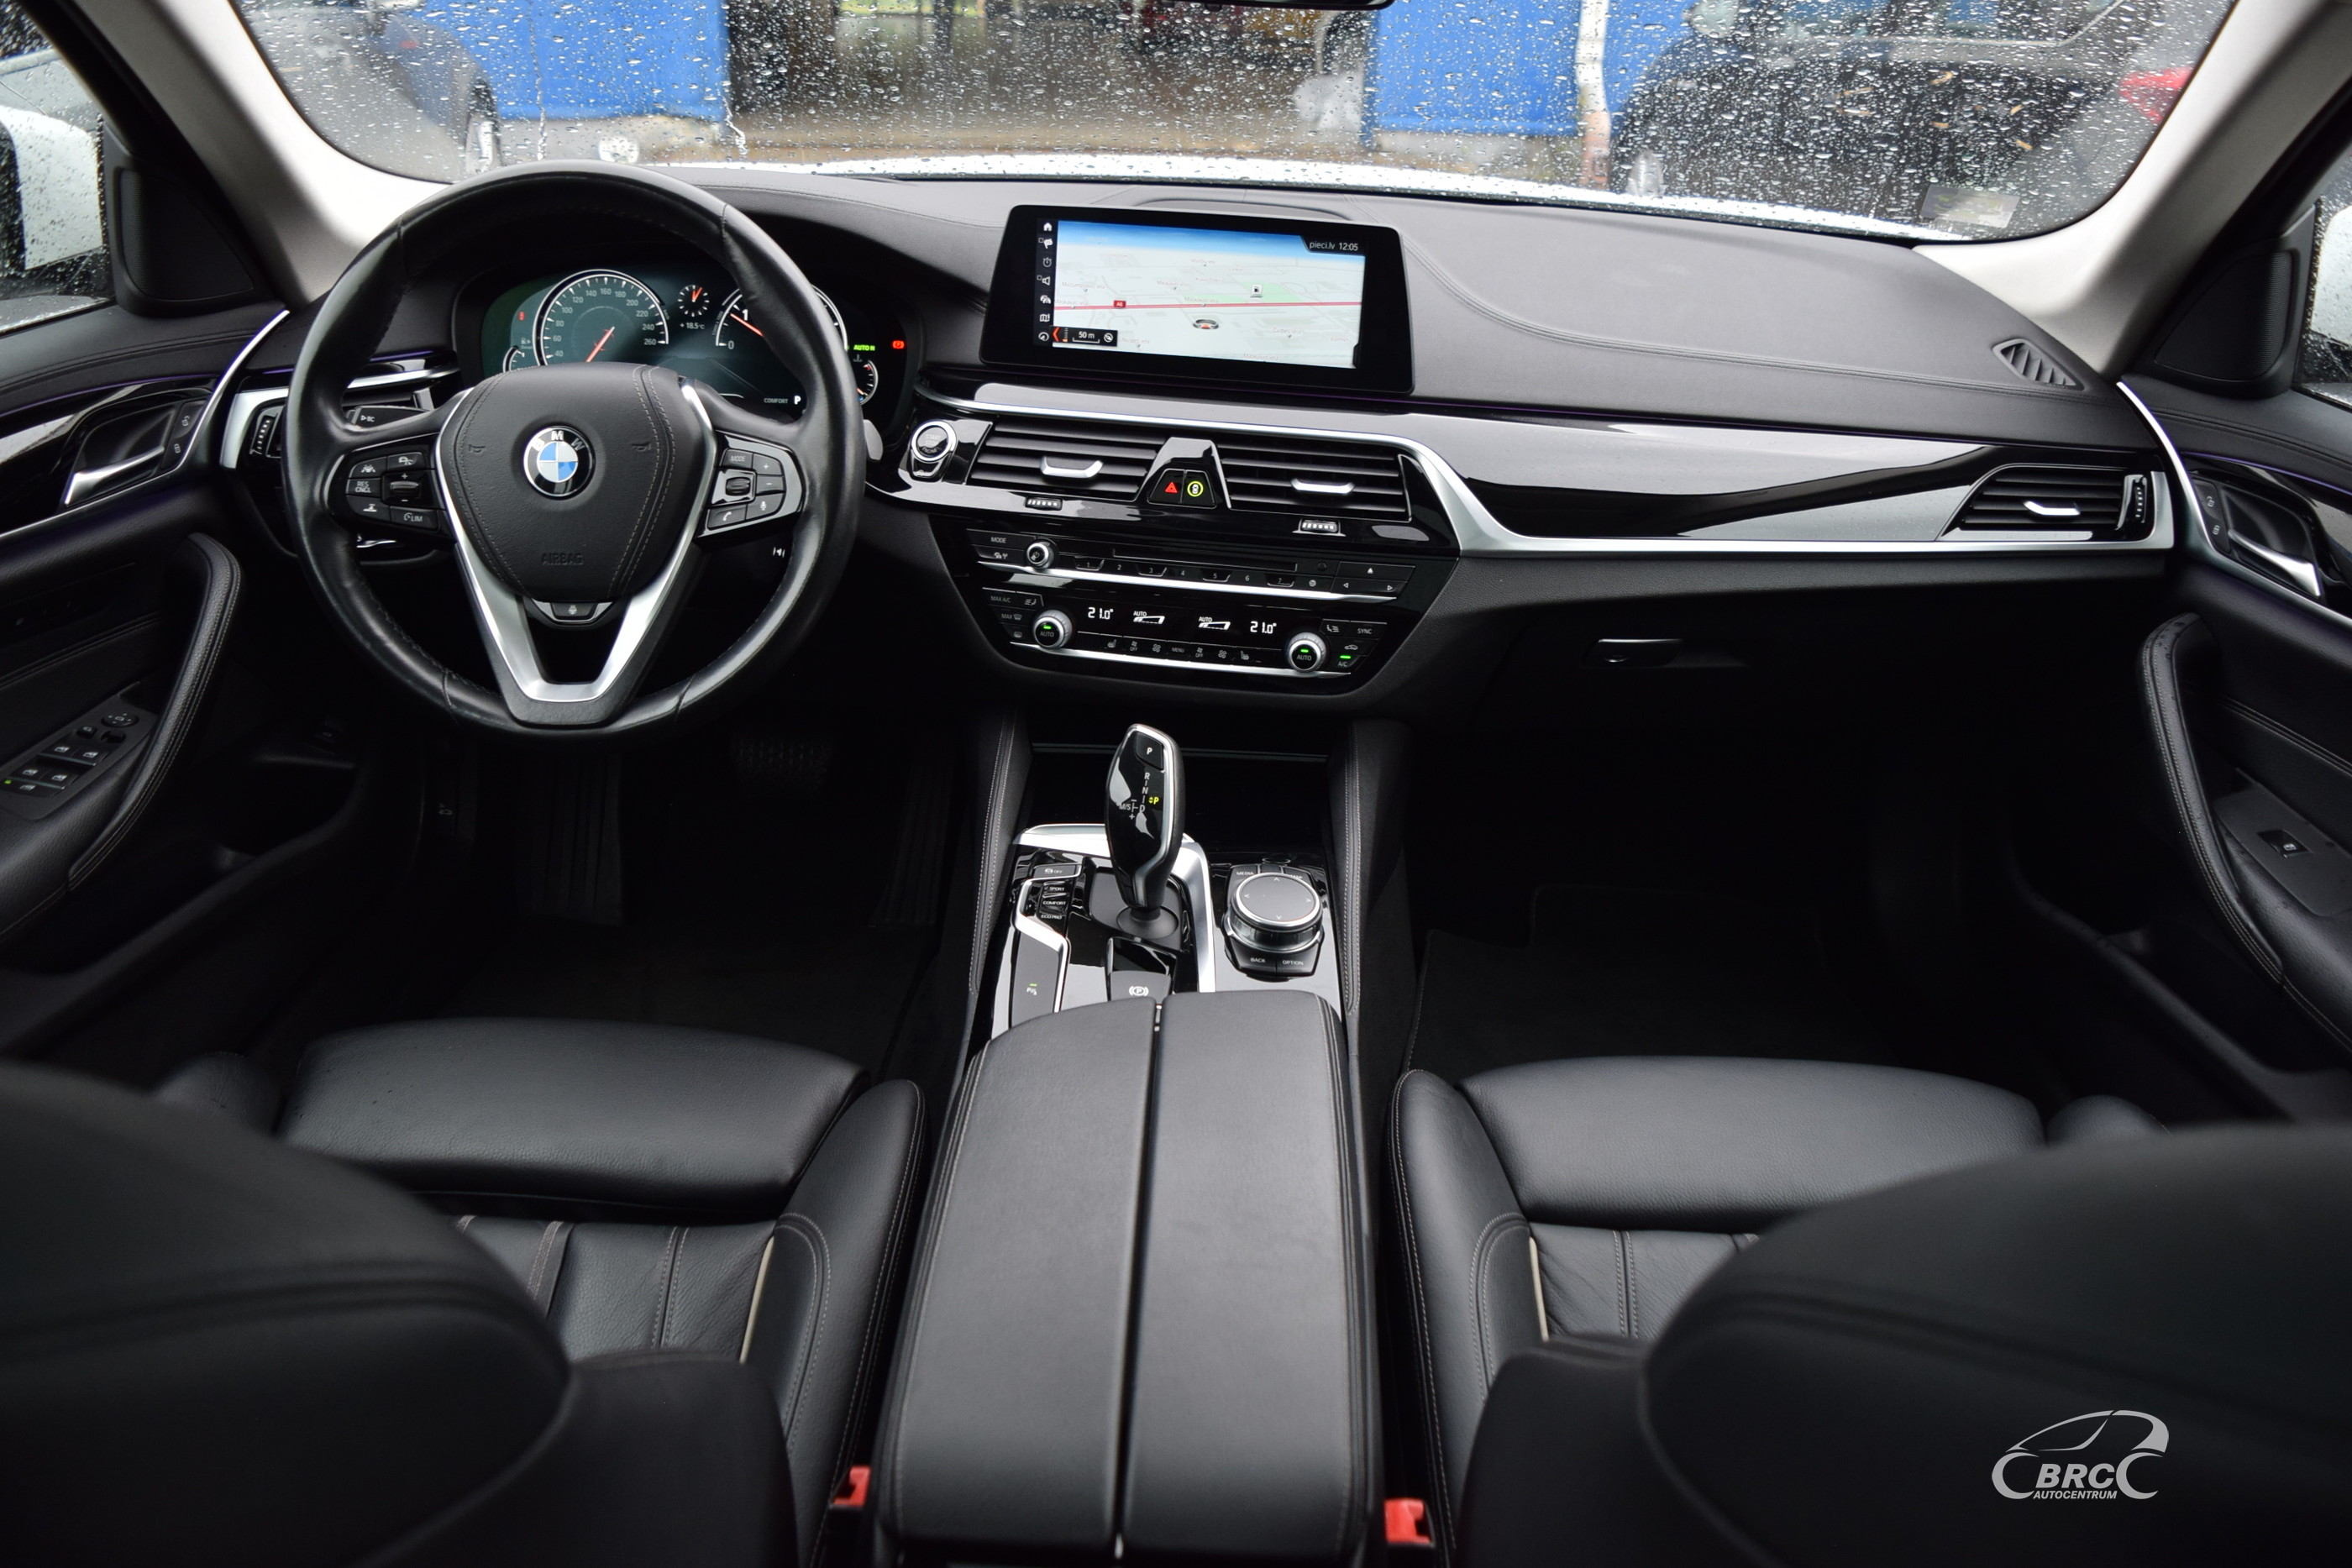 BMW 520 D Touring Luxury Line A/T